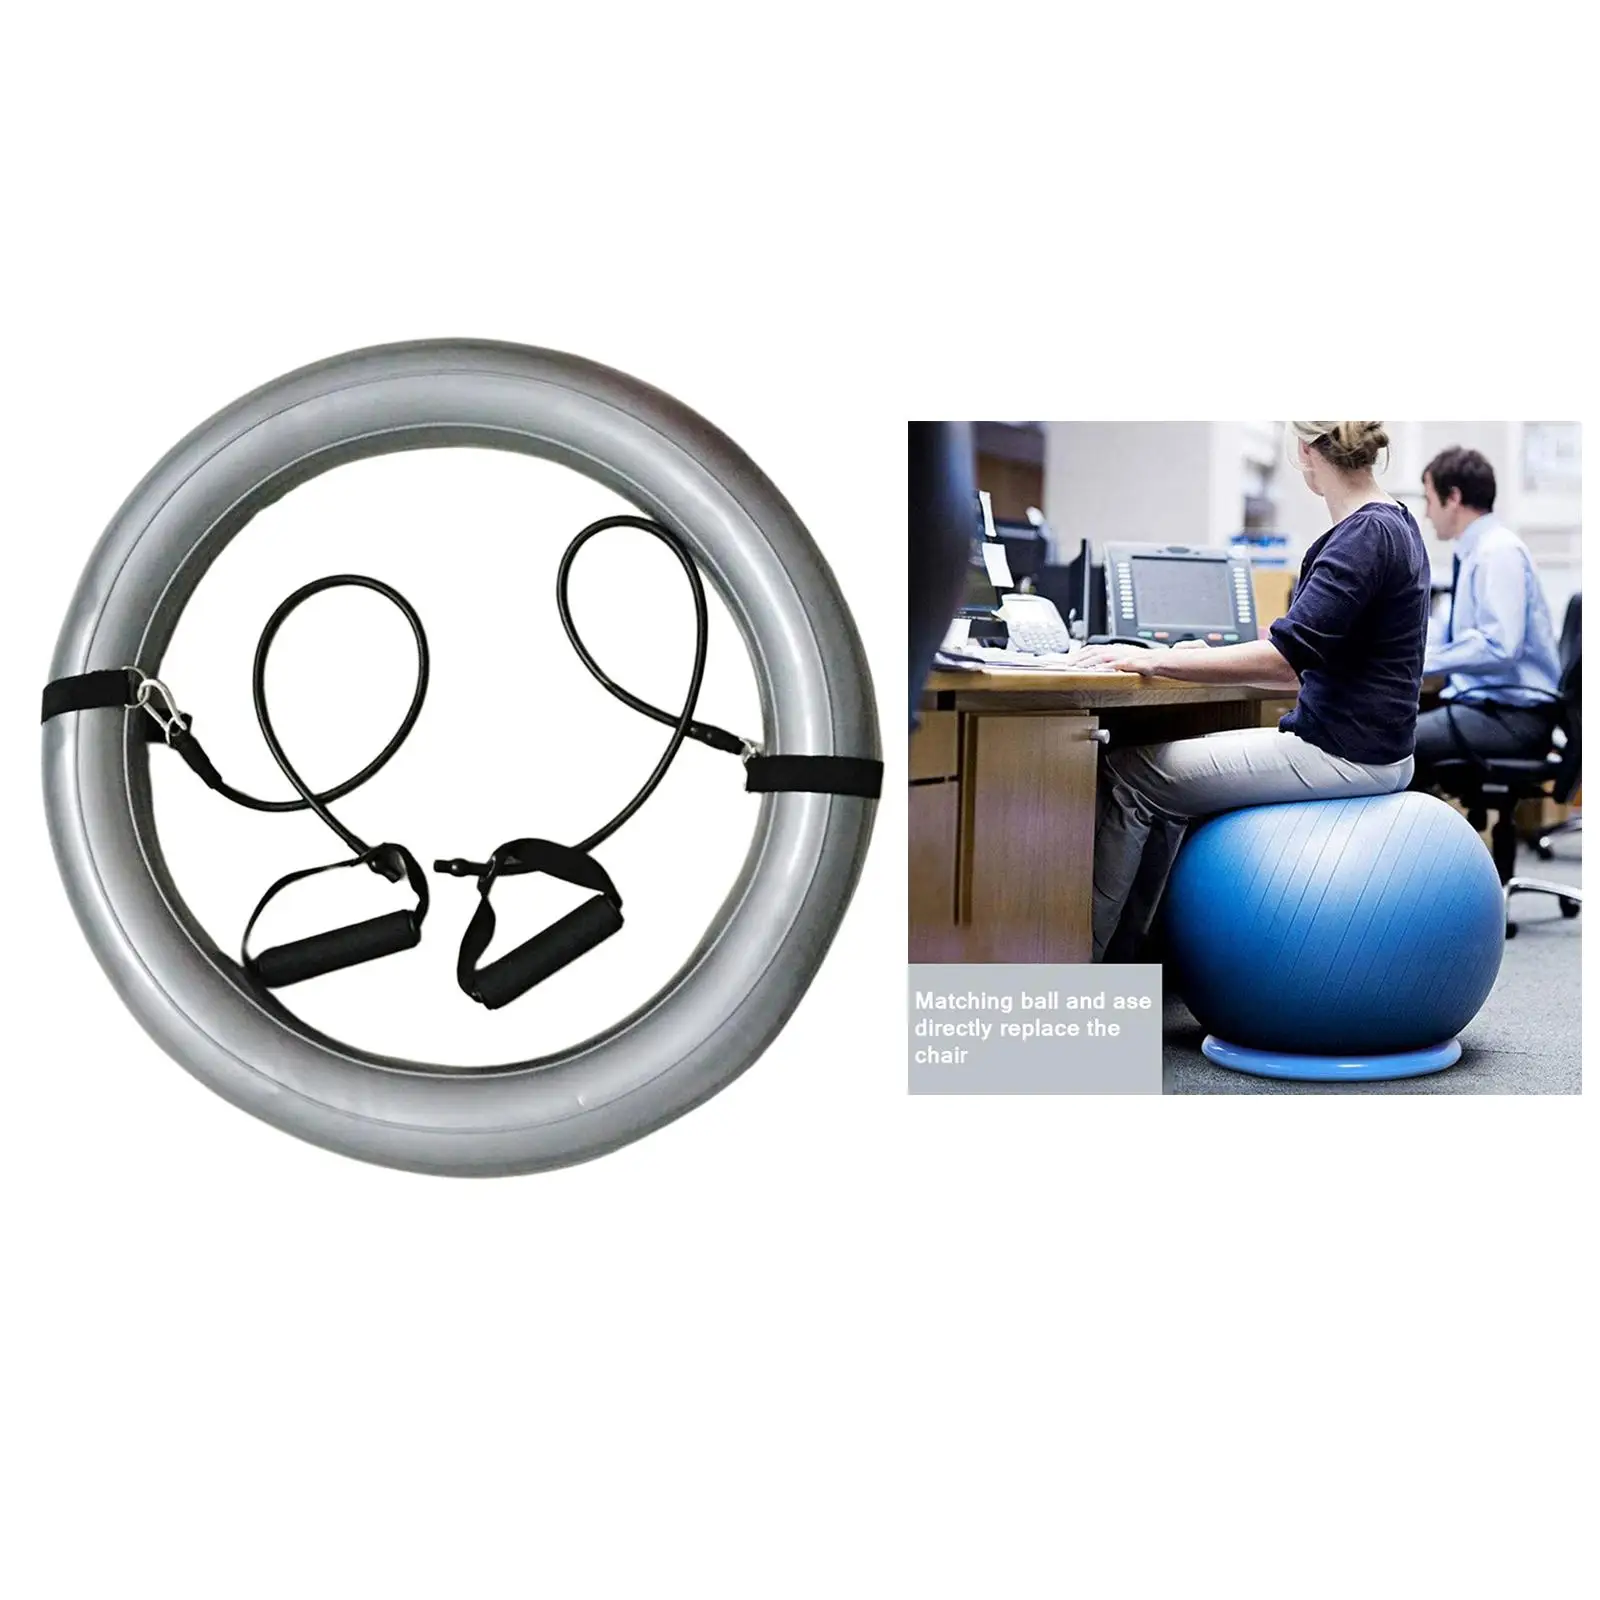 Yoga Ball Chair Inflatable Stability Ring Holder Base Detachable Exerting Resistance Bands Handle